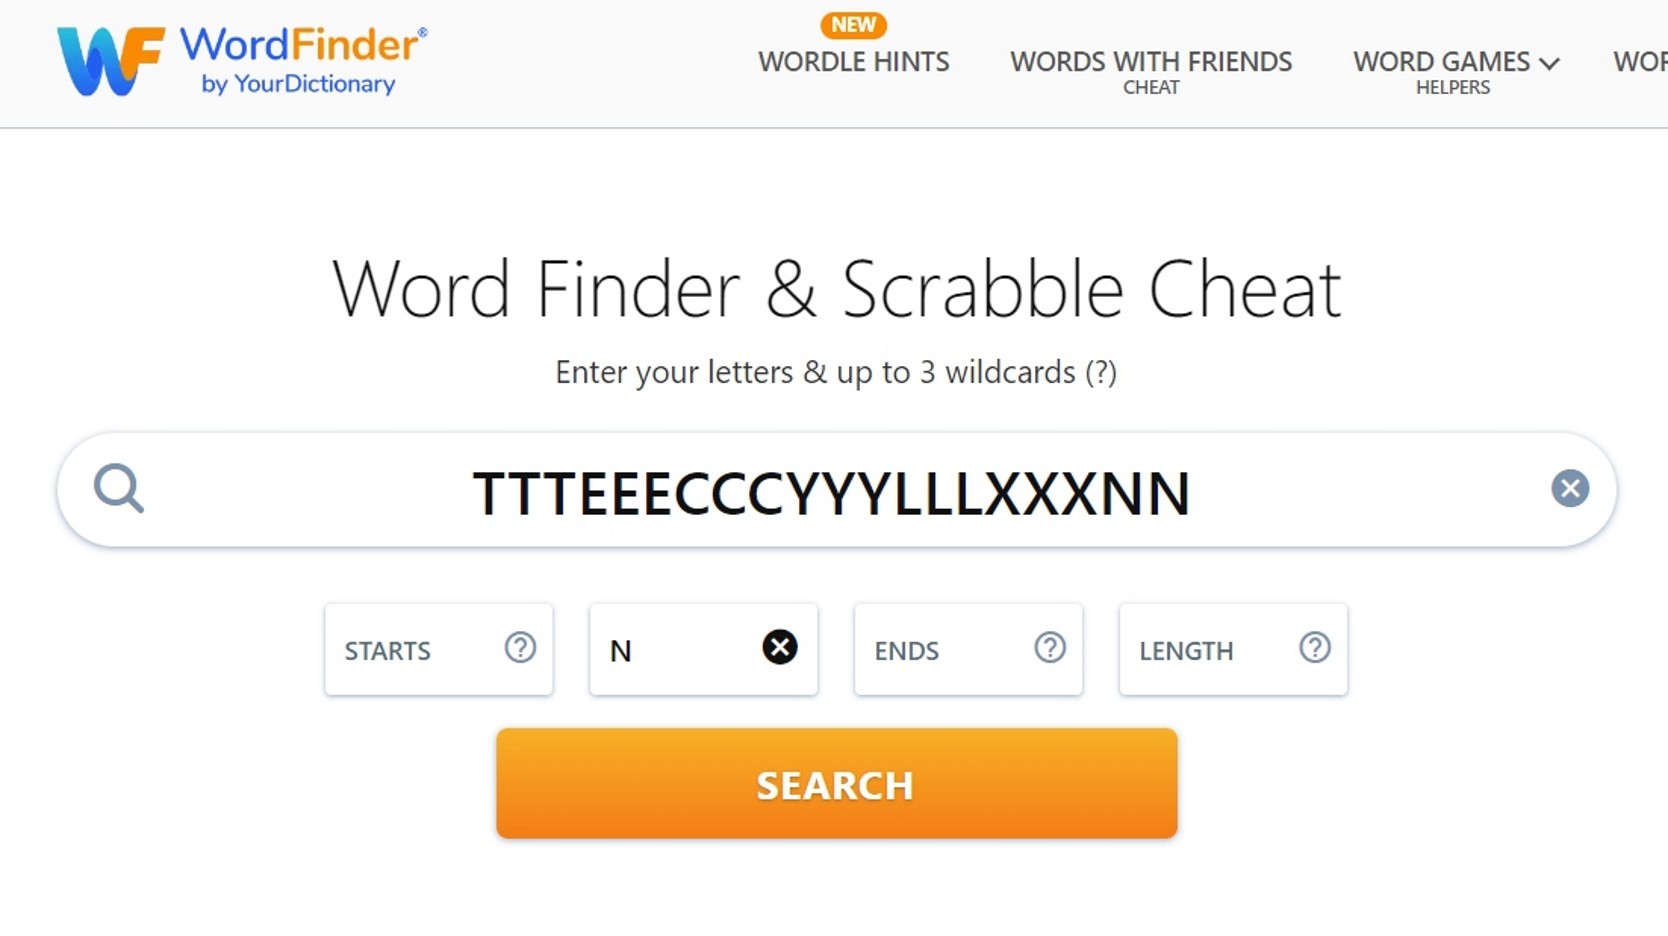 WordFinder by YourDictionary word finder tool